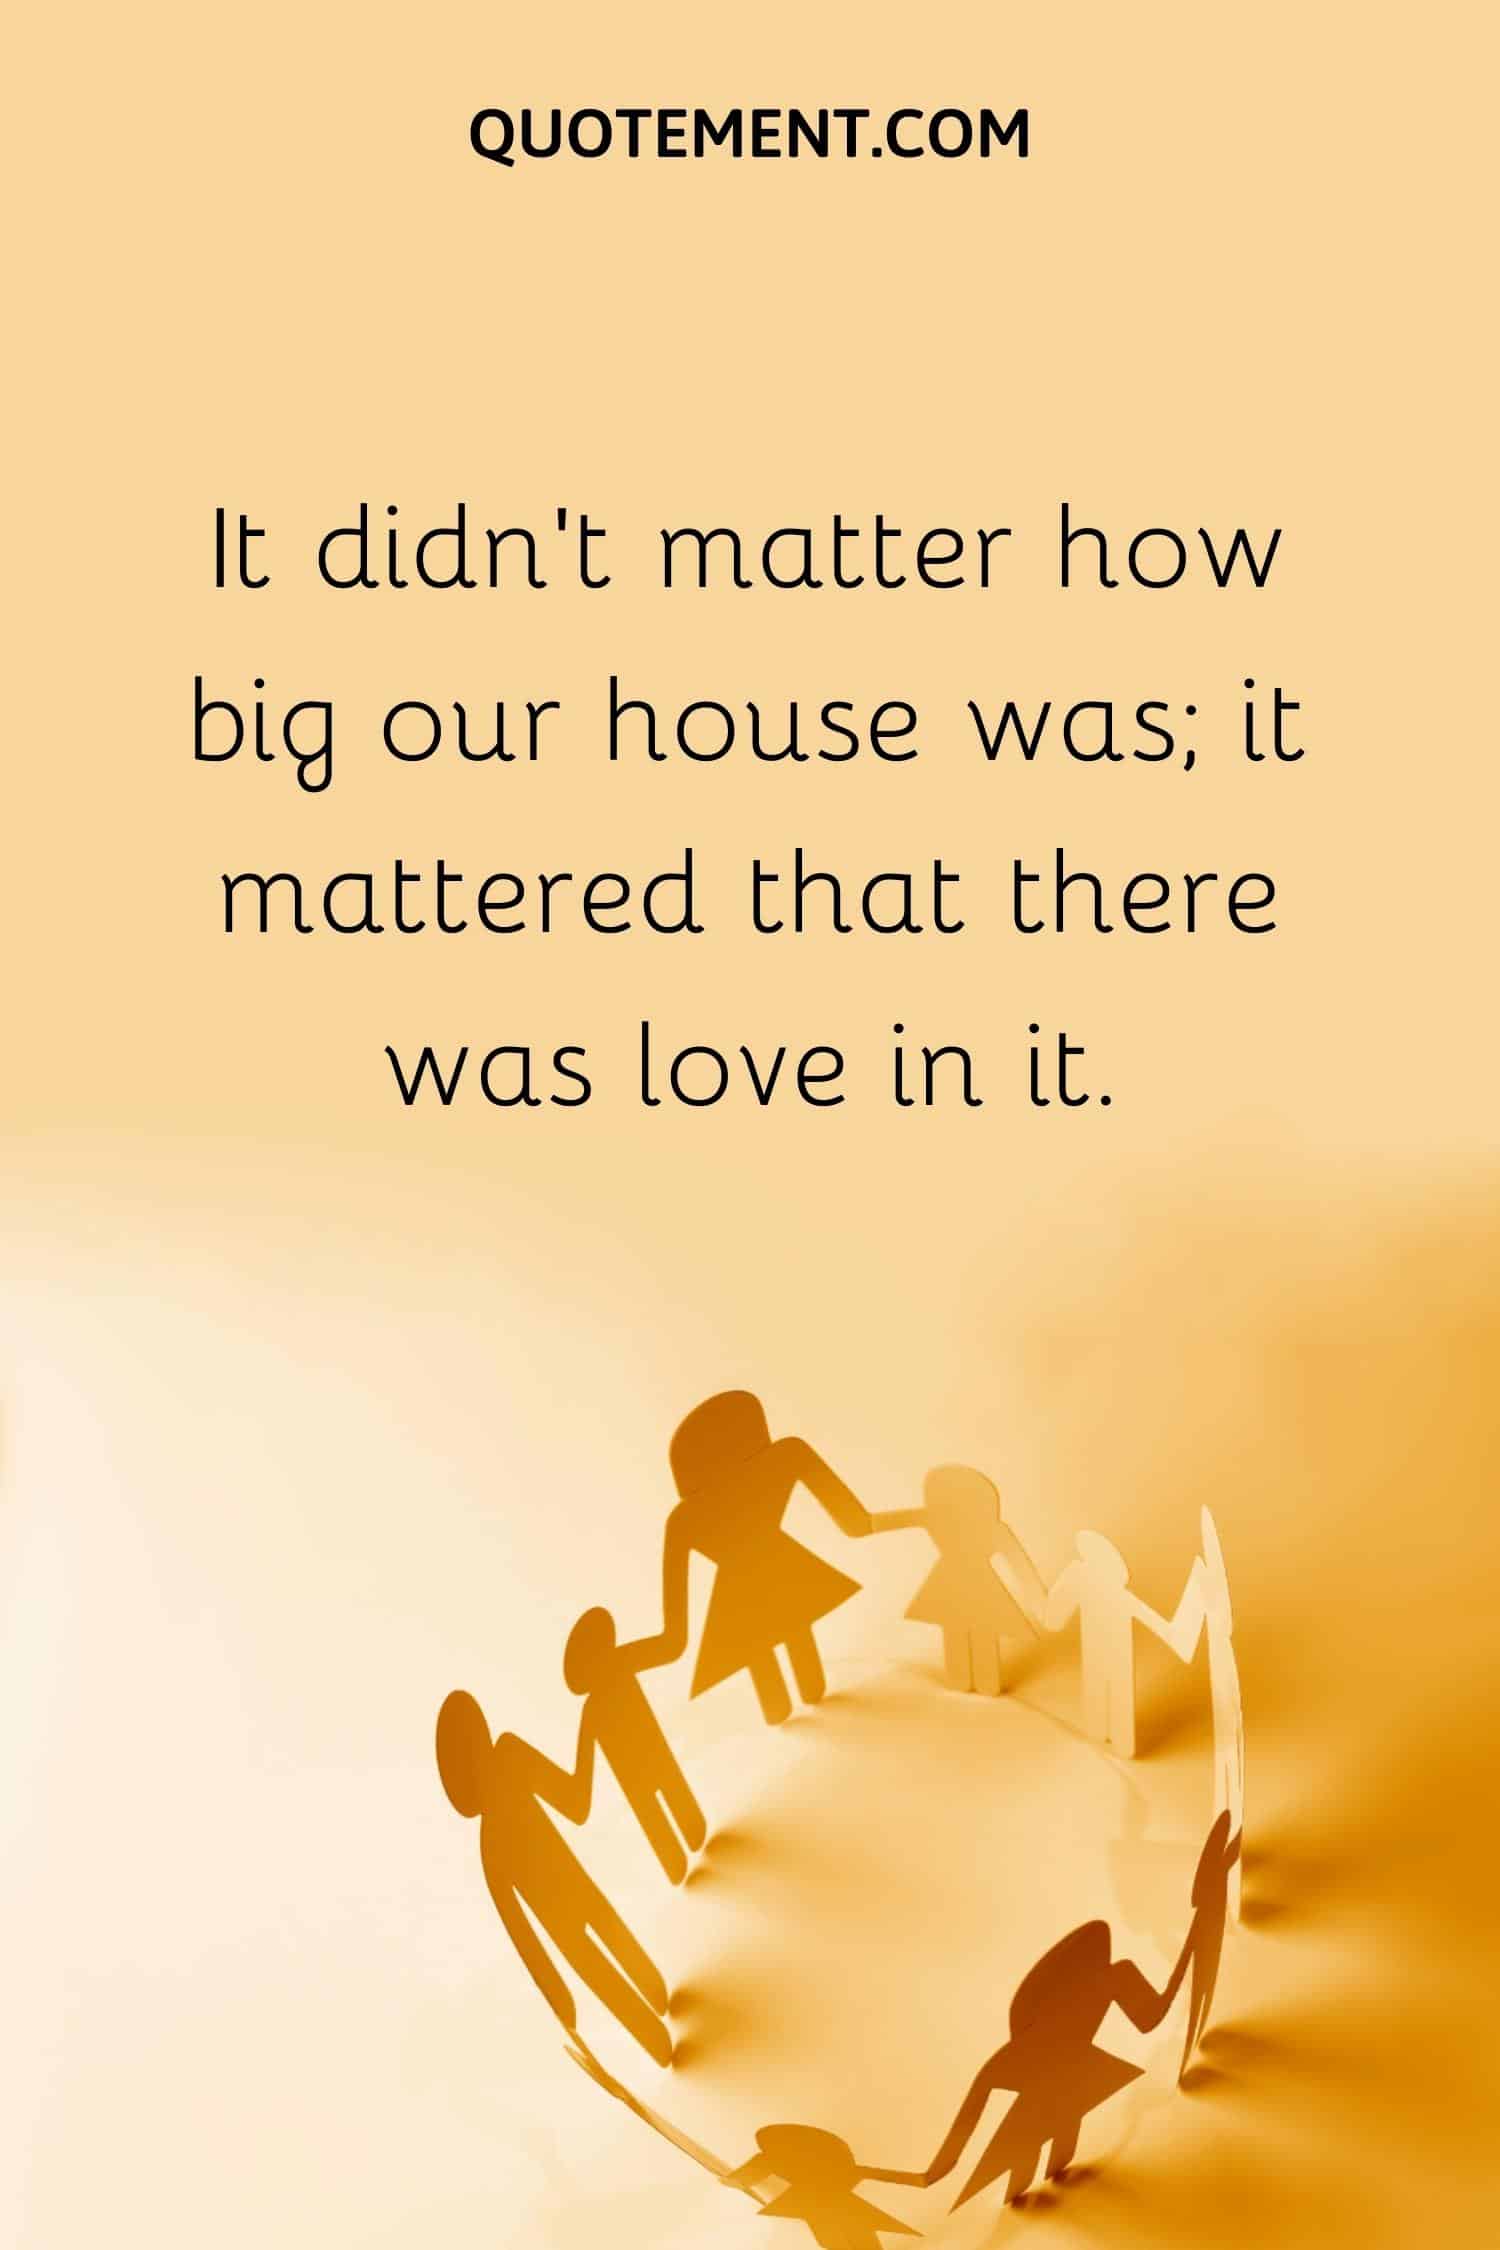 It didn’t matter how big our house was; it mattered that there was love in it.